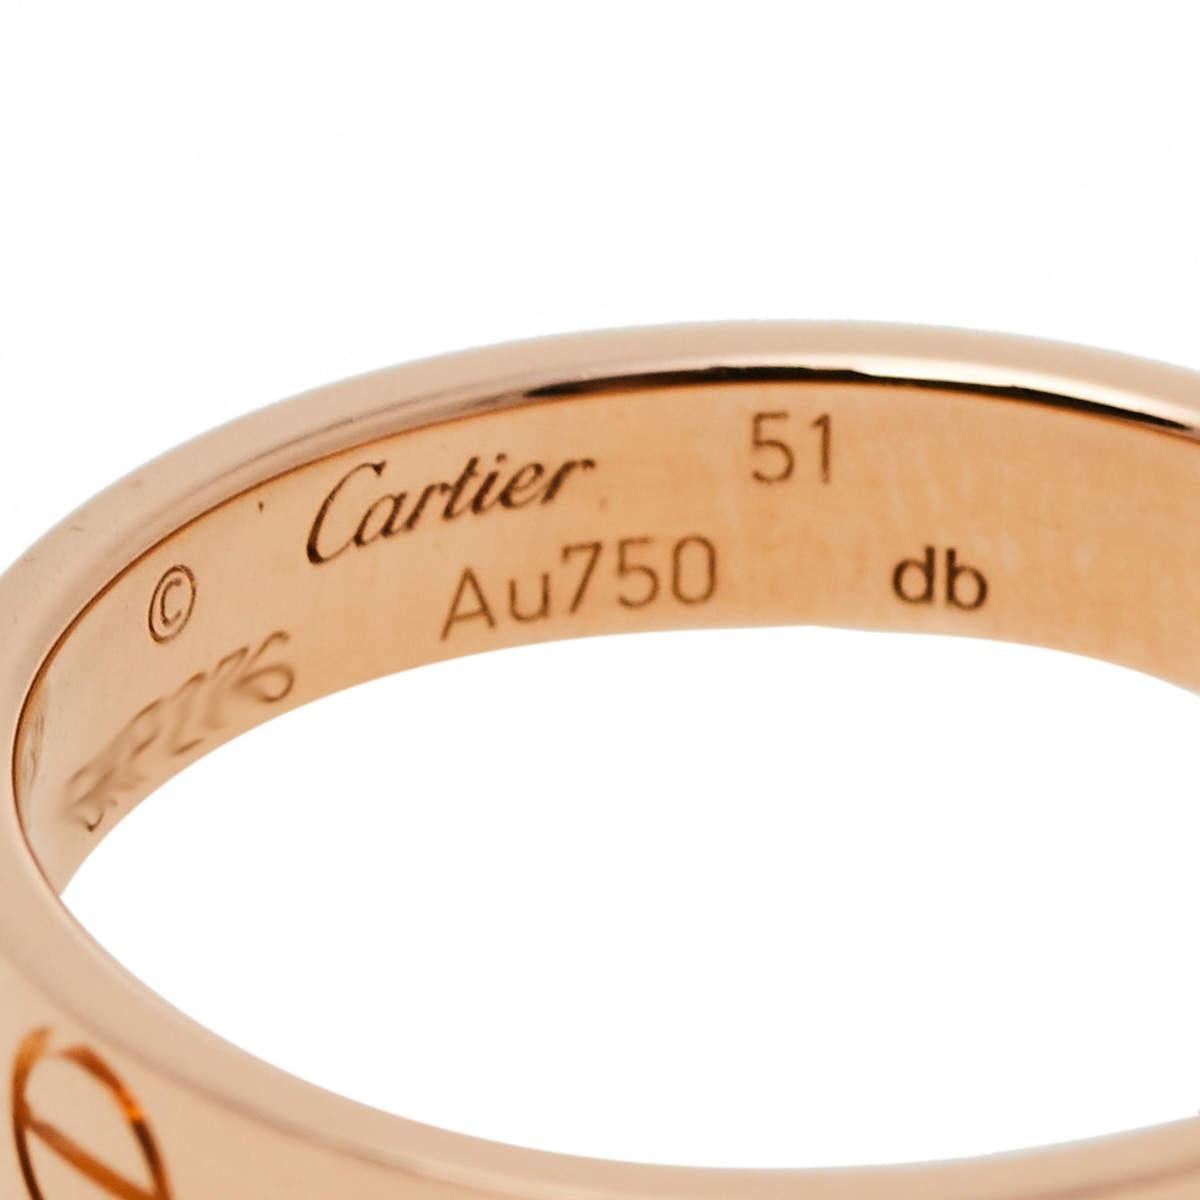 Contemporary Cartier Love 18K Rose Gold Wedding Band Ring Size 51